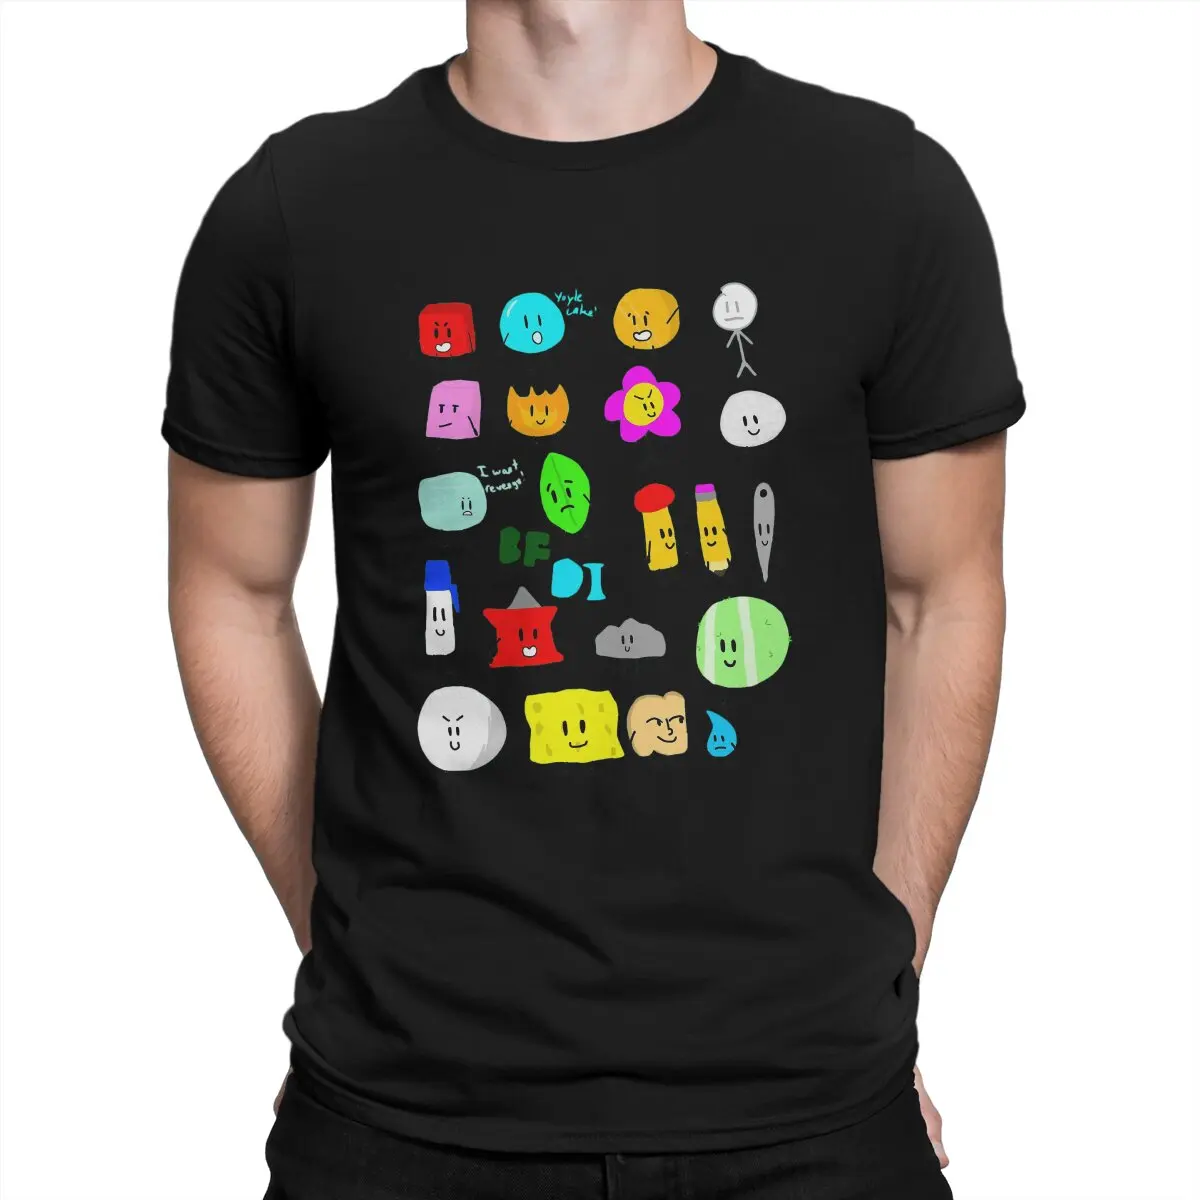 Characters Essential  Men T Shirt Battle for Dream Island BFDI 4 and X Humor Tees  Crewneck T-Shirts 100% Cotton Graphic Clothes